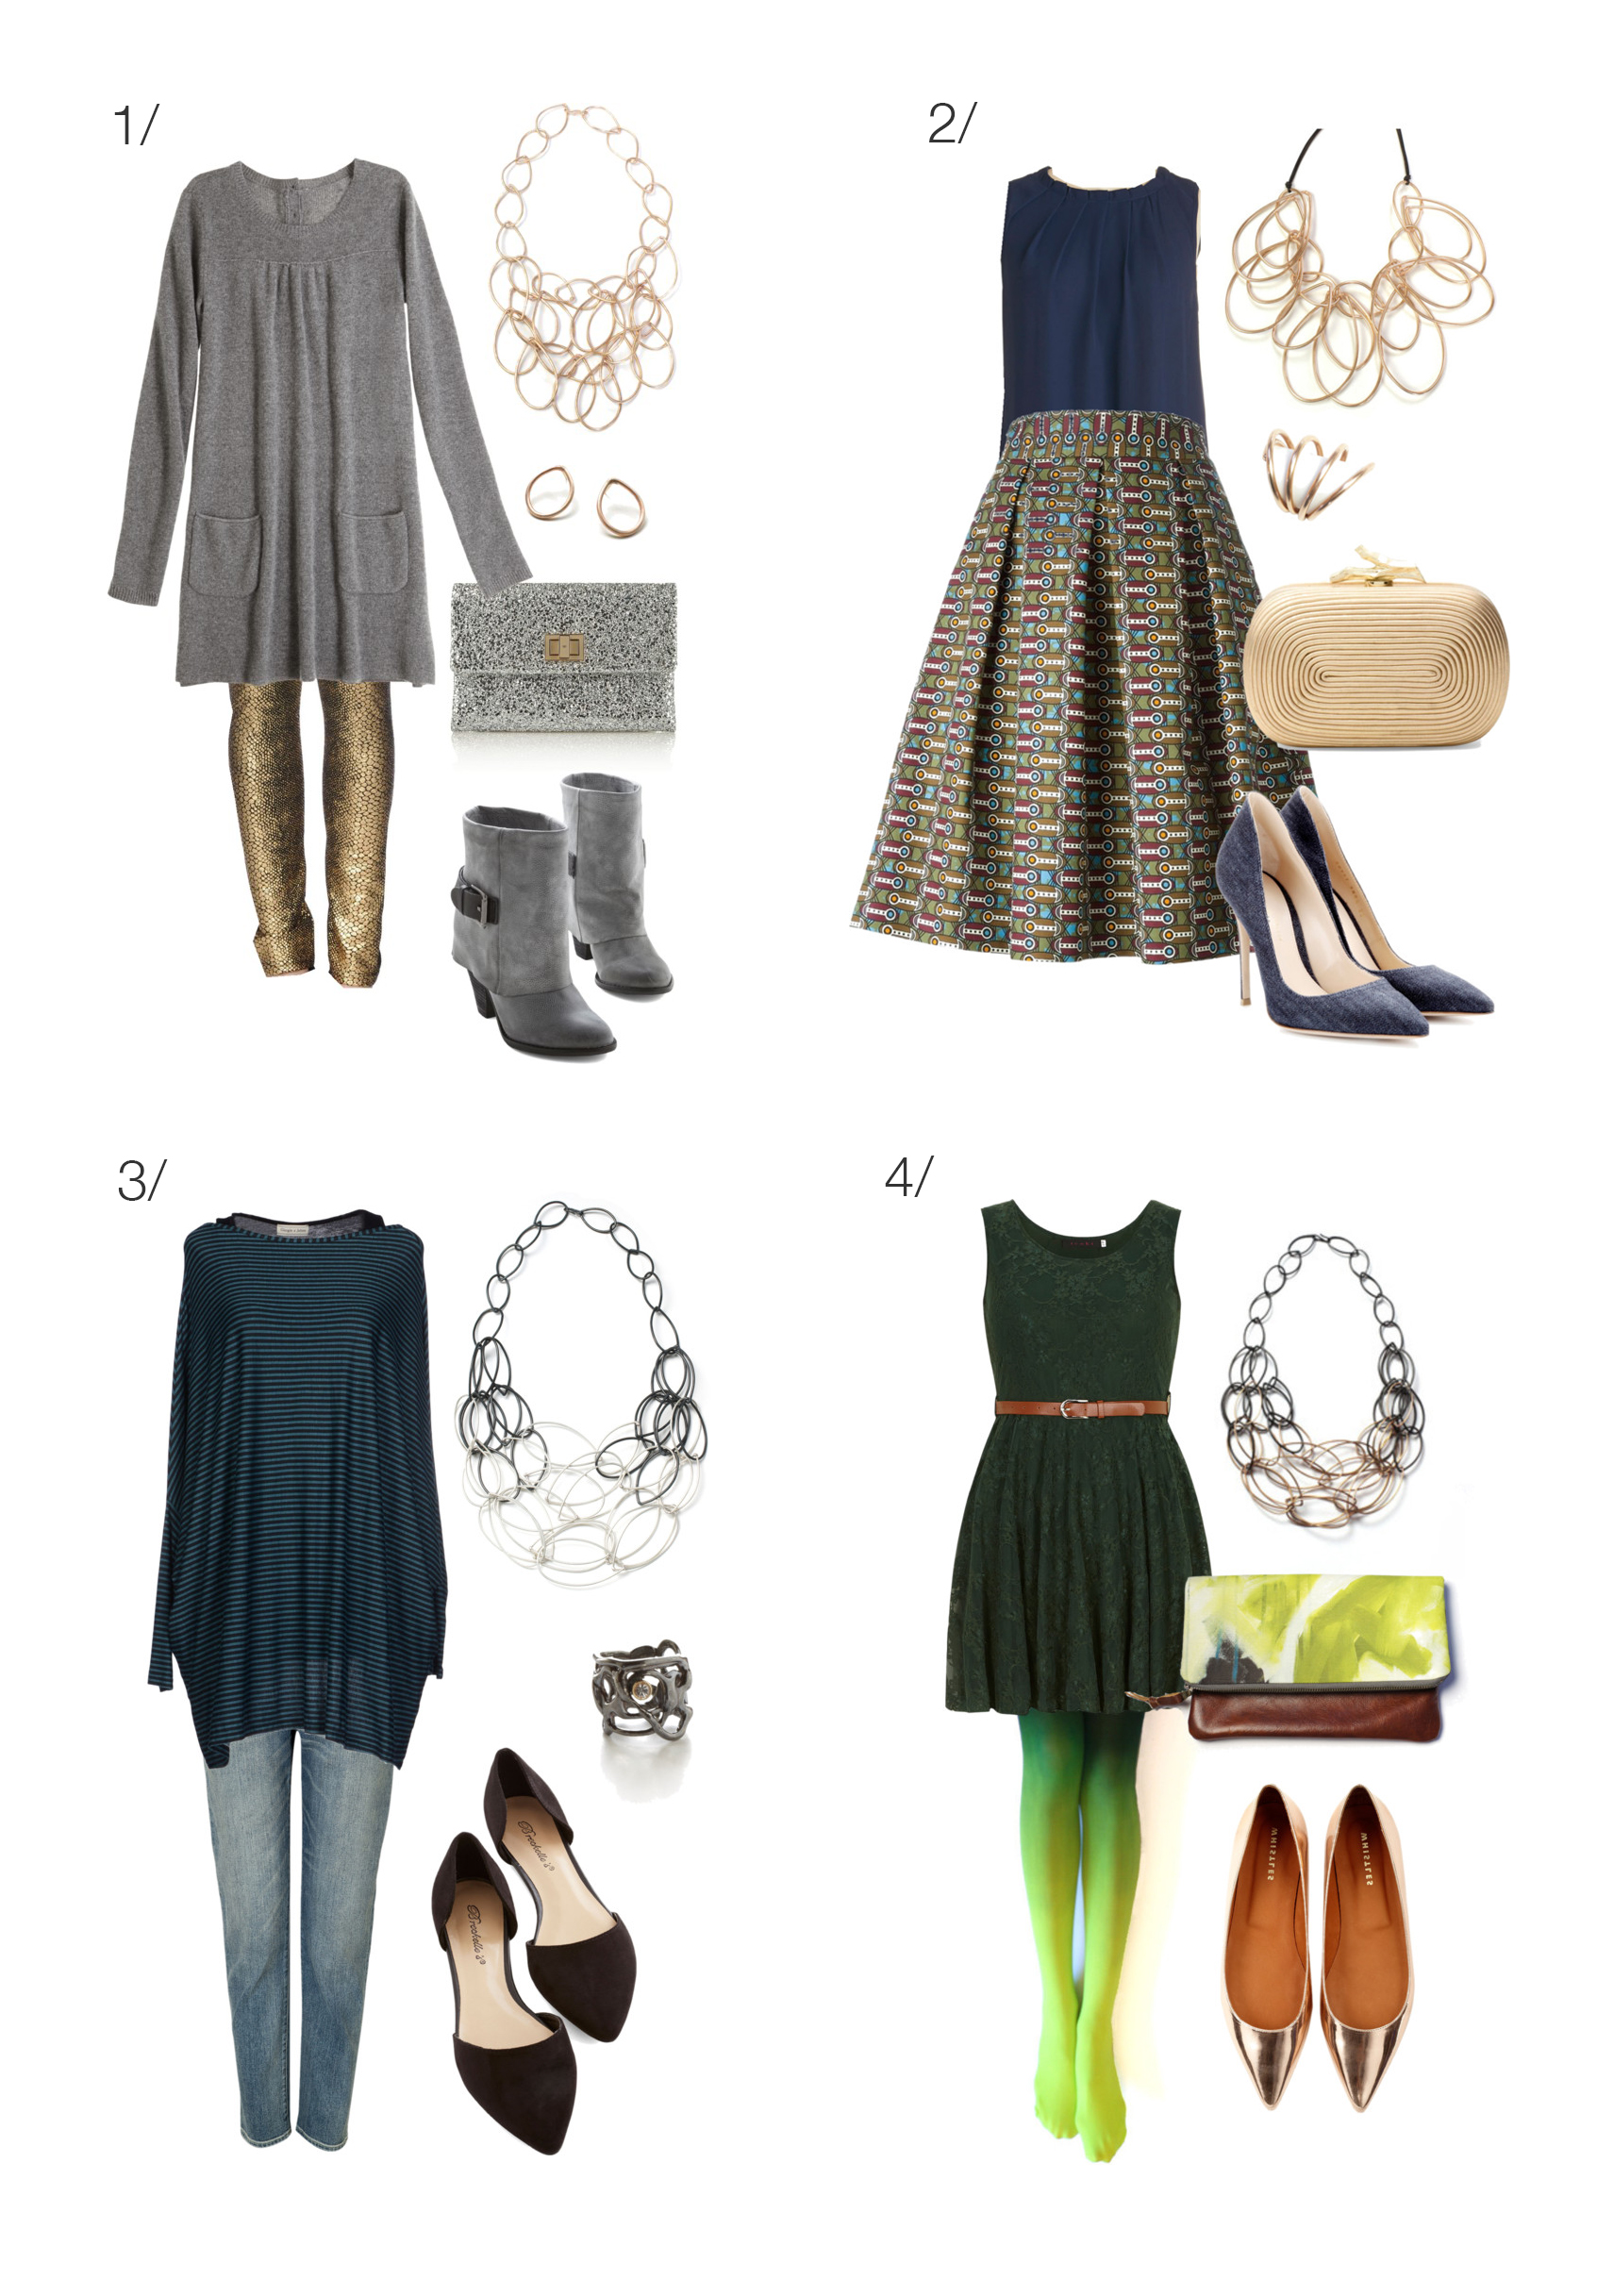 eight outfit ideas for your next holiday party // Click for outfit details.